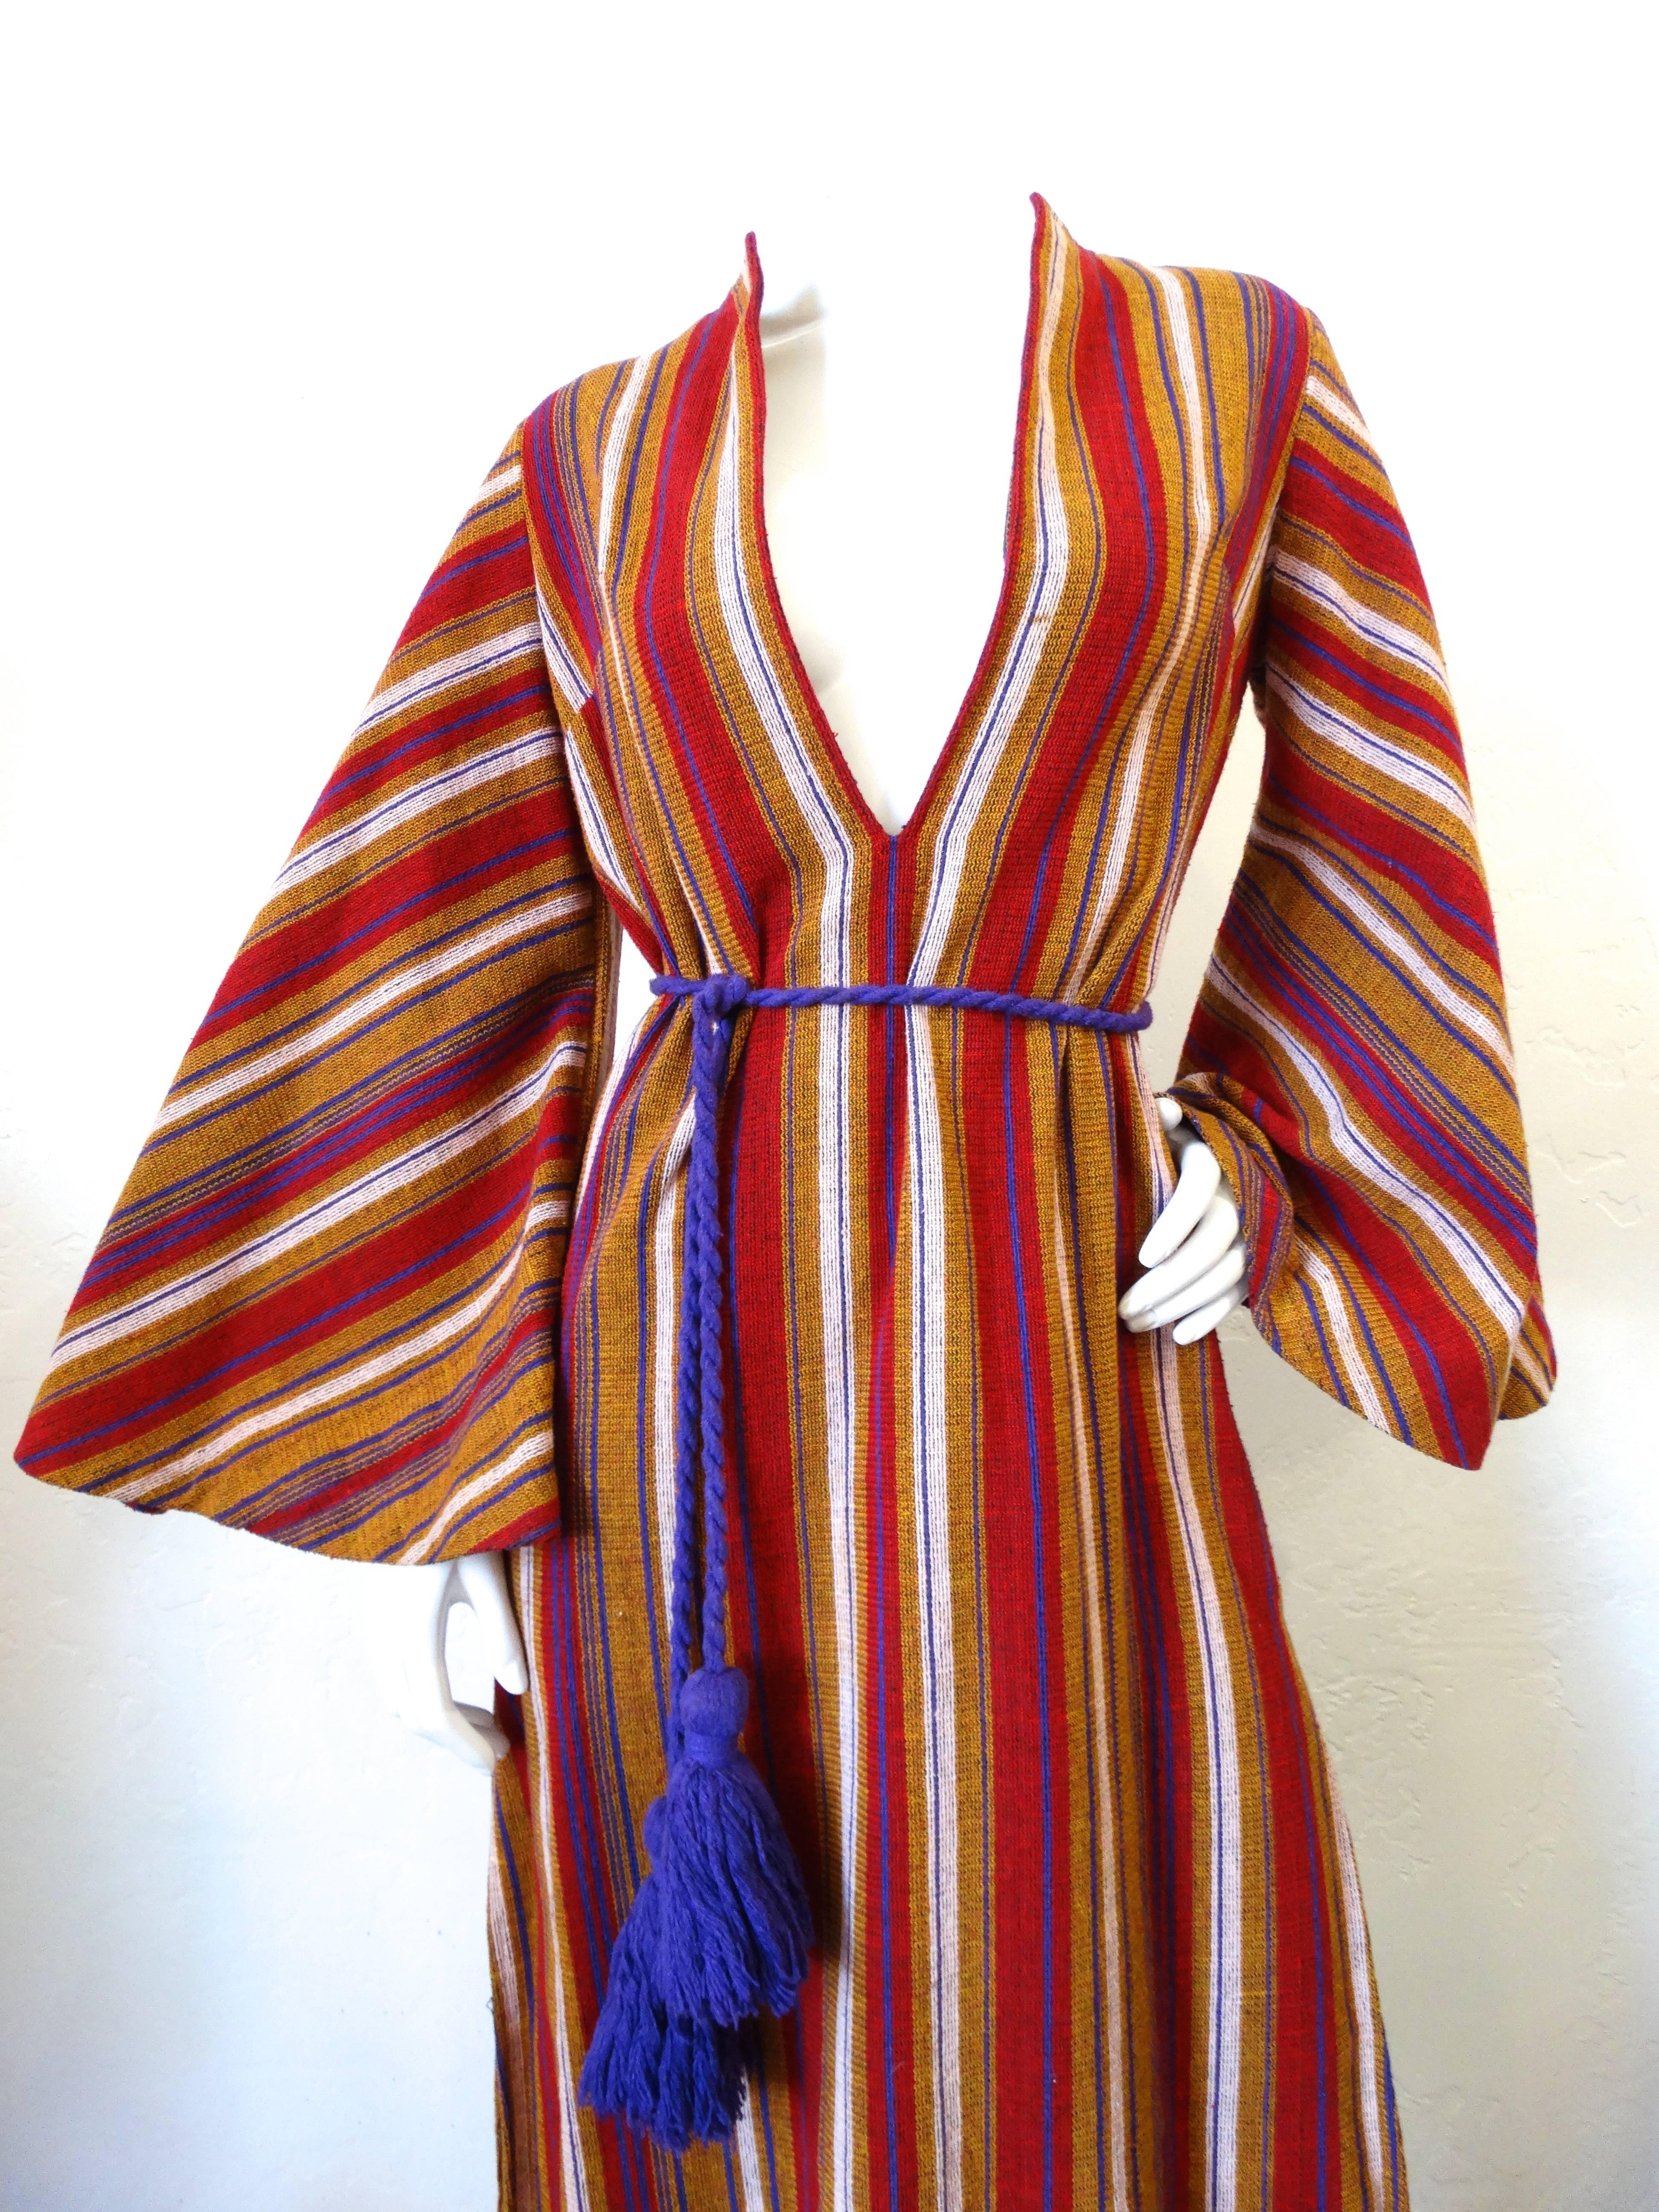 Incredible 1970s Rikma maxi dress! Made of woven cotton in a multicolored stripe print. Purple yarn tassel cinches the waist perfectly just below the deep V-neckline. Large bell sleeves with side splits on each side of the dress.  Fits about a size